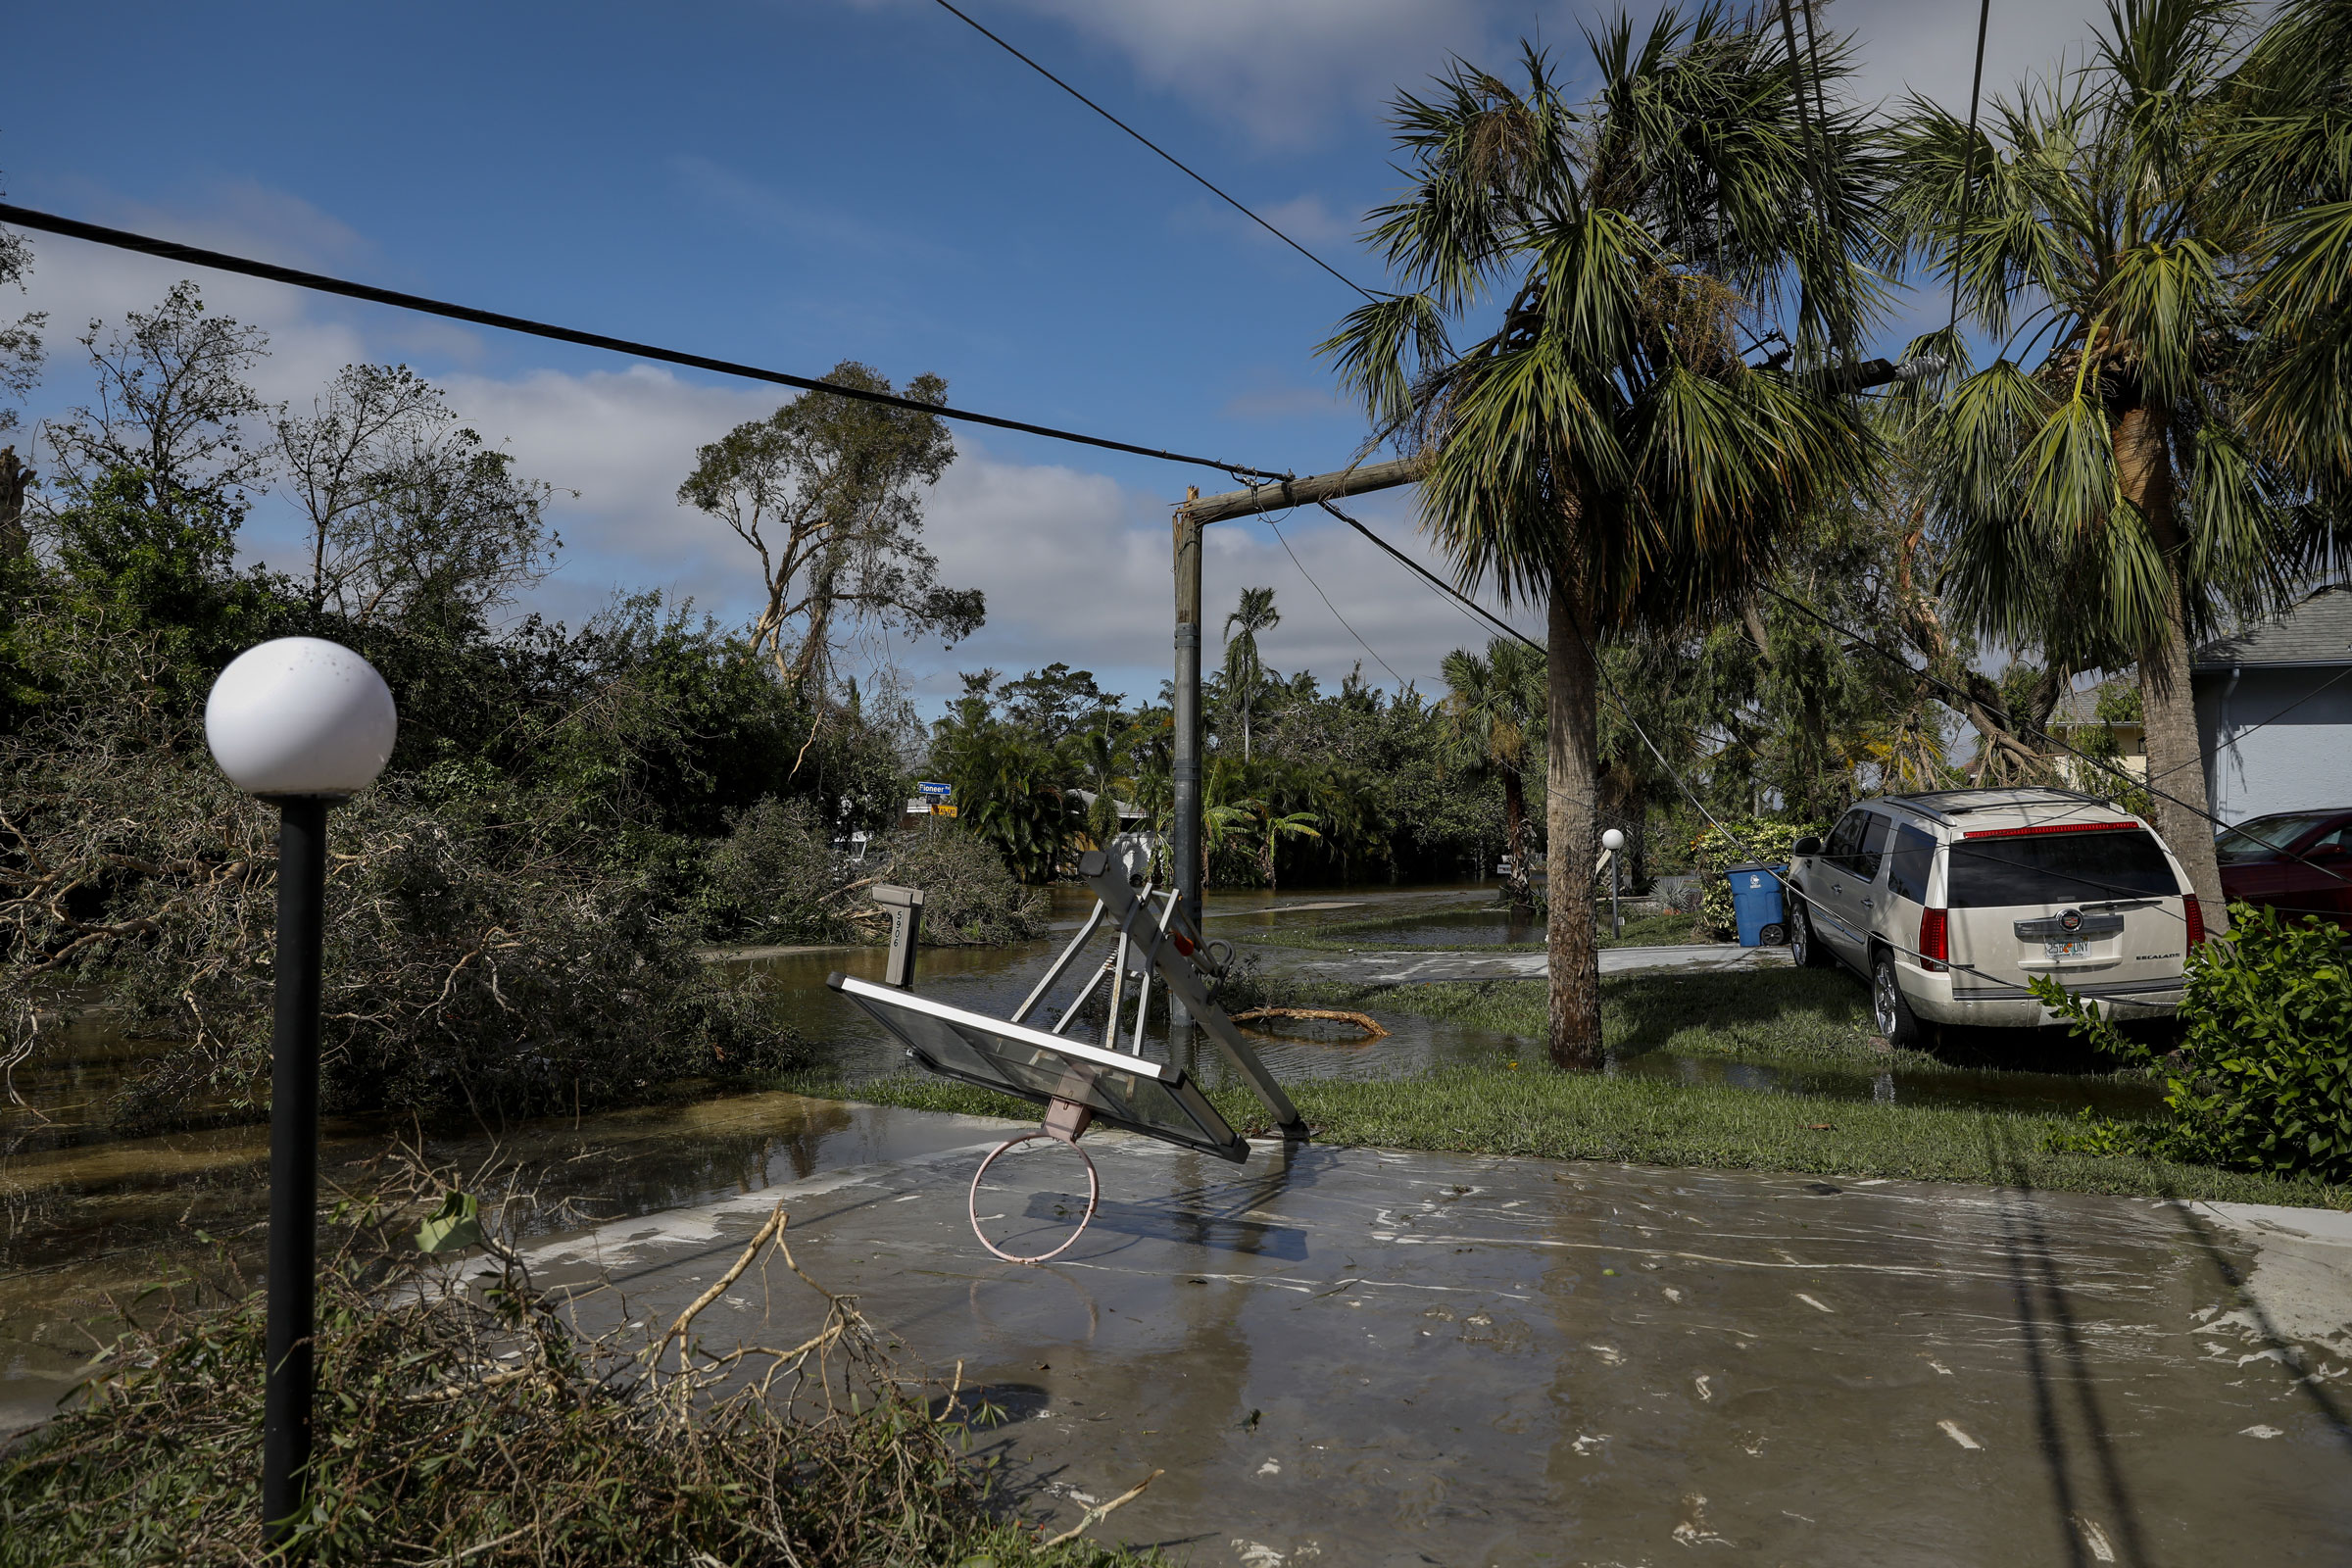 A broken utility pole behind a collapsed basketball hoop on a flooded street following Hurricane Ian in Fort Myers, Fla., on Sept. 29. (Eva Marie Uzcategui—Bloomberg/Getty Images)